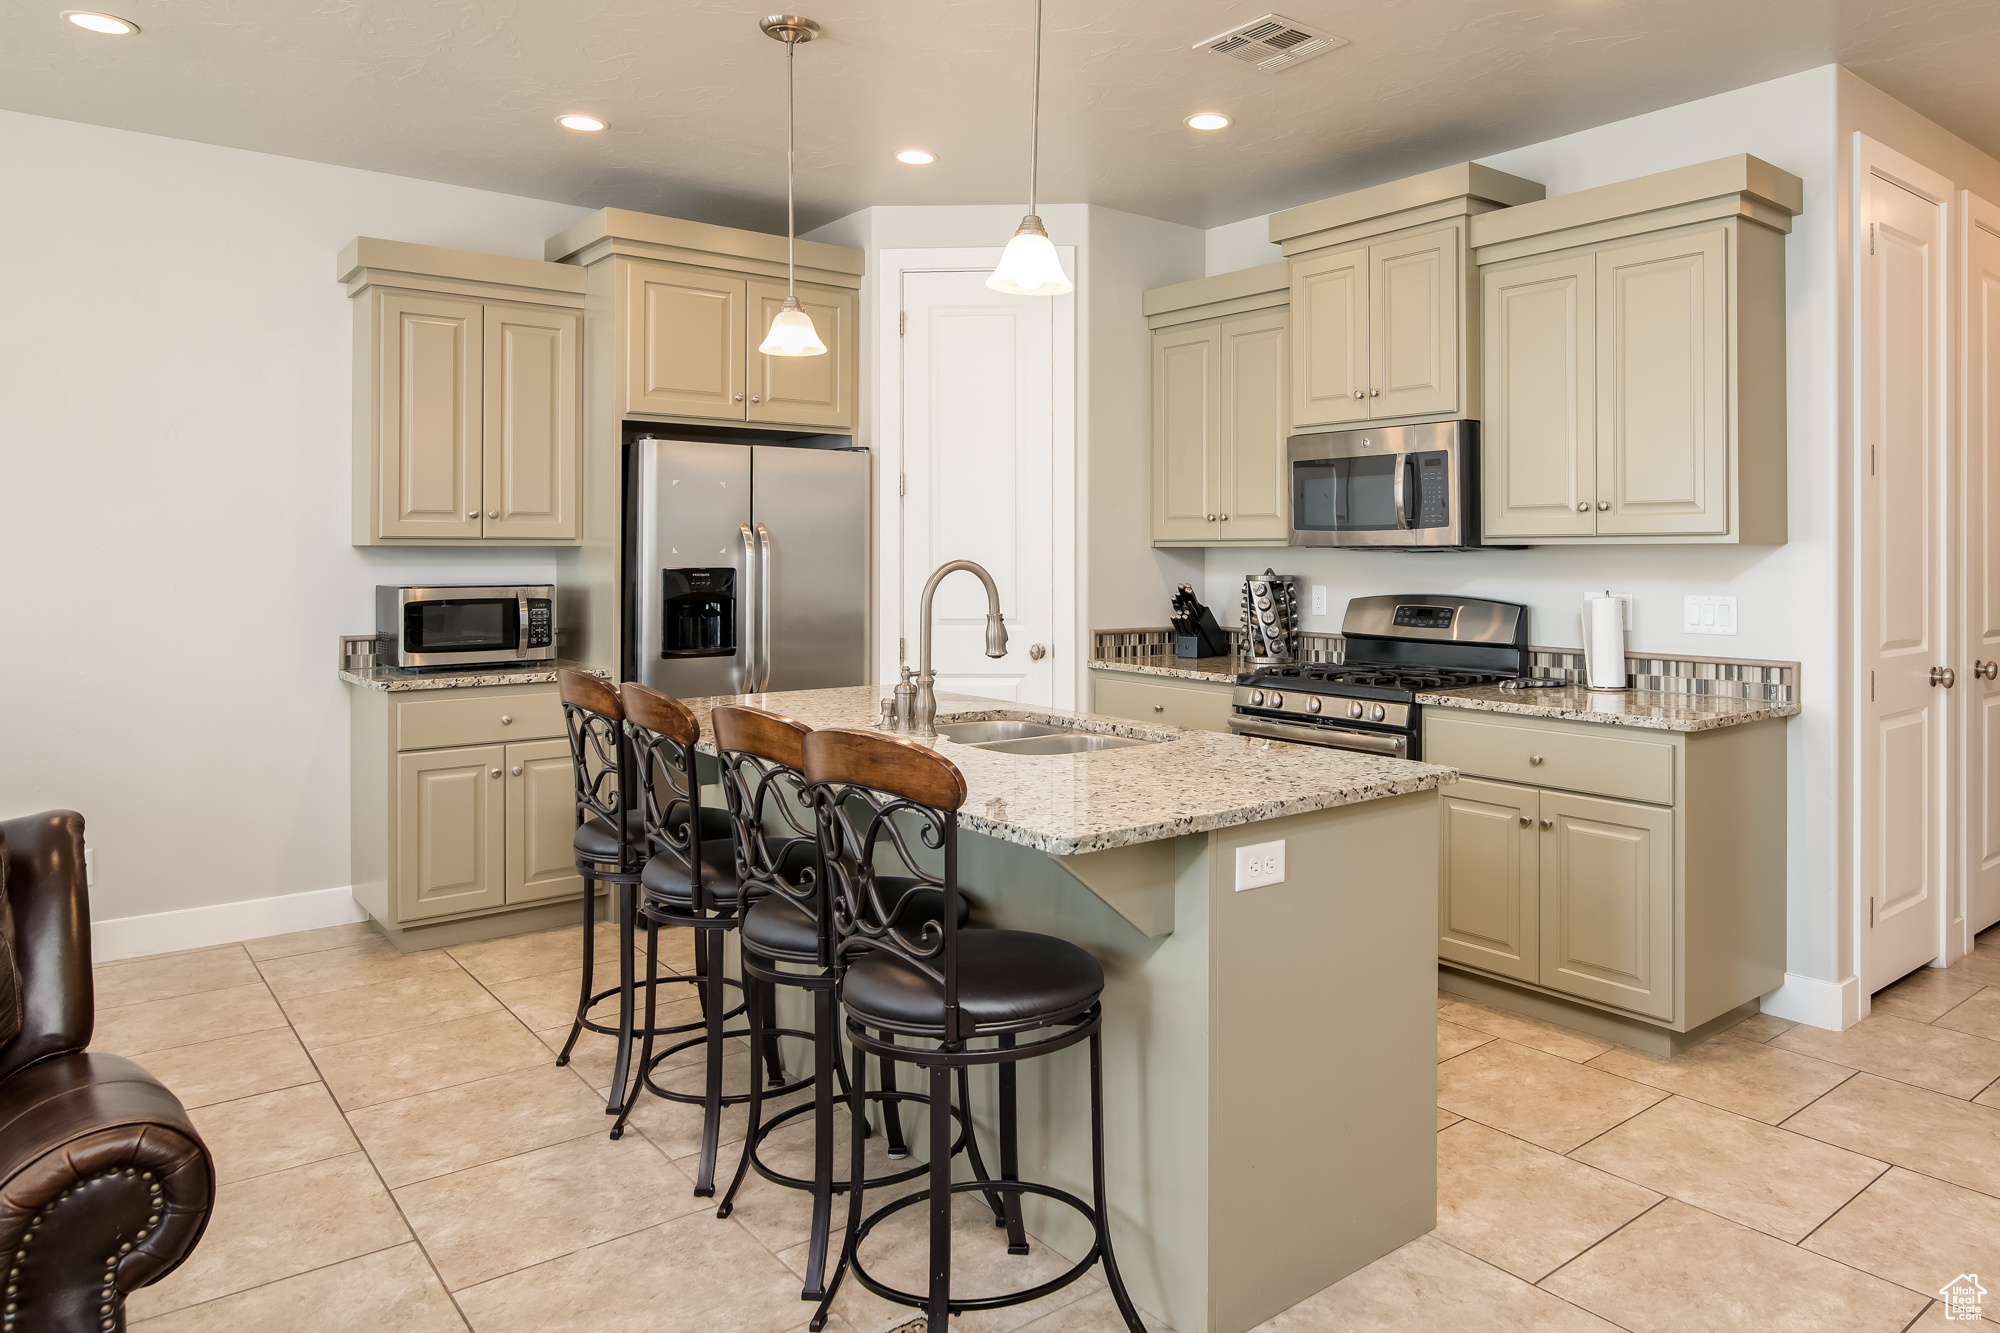 Kitchen featuring stainless steel appliances, a kitchen island with granite countertops, sink, pendant lighting, and light tile floors